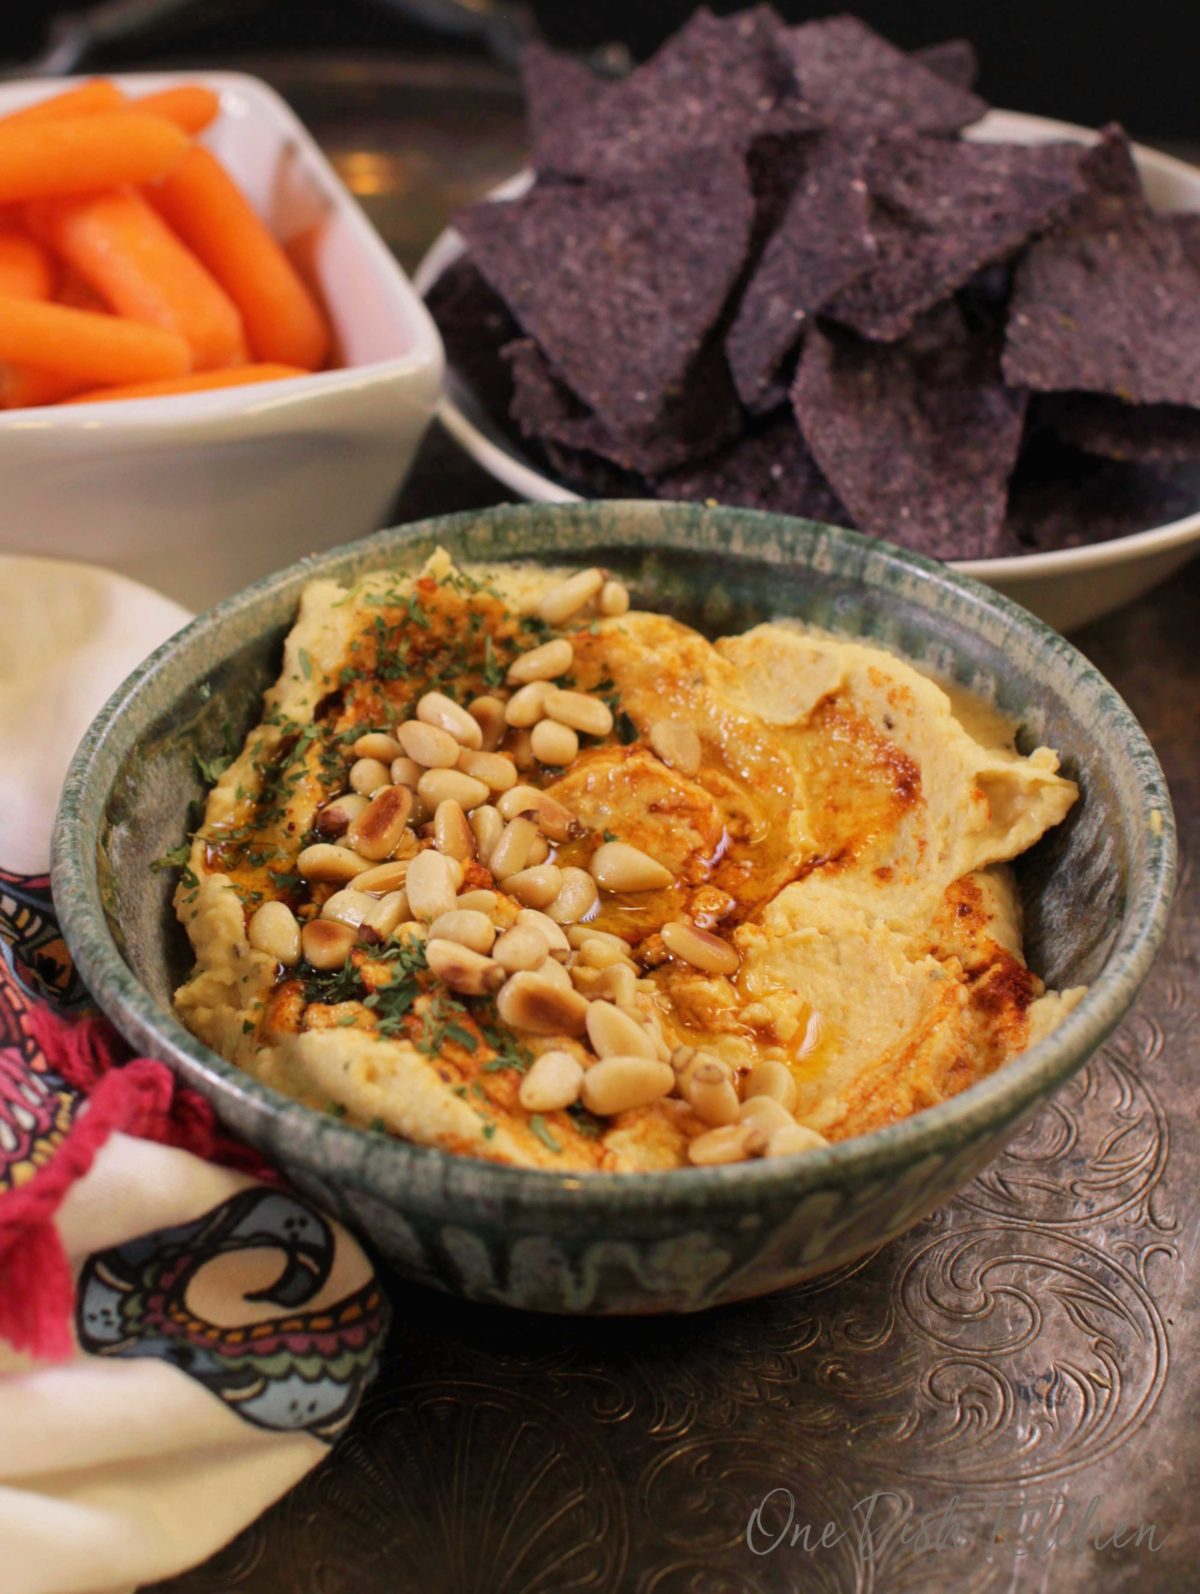 A bowl of hummus topped with toasted pine nuts, olive oil, and paprika next to a bowl of blue corn tortilla chips and a small bowl of baby carrots all on a metal tray.